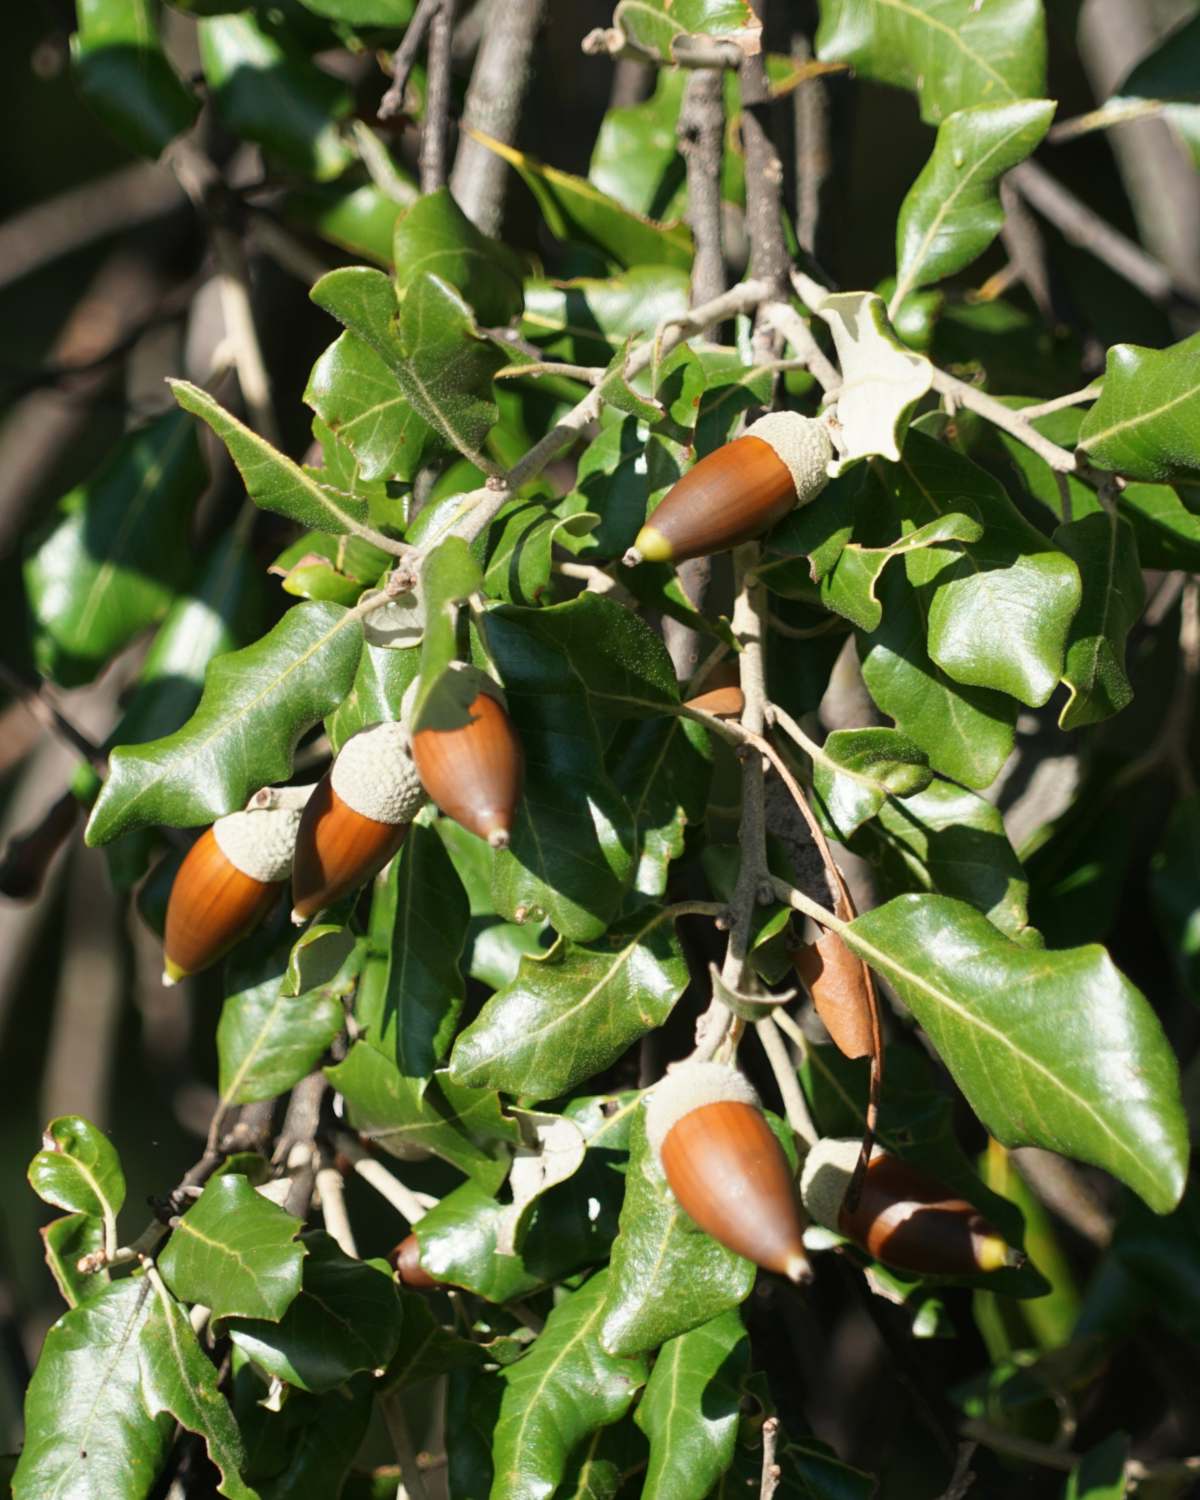 Branches and fruits of an evergreen oak tree